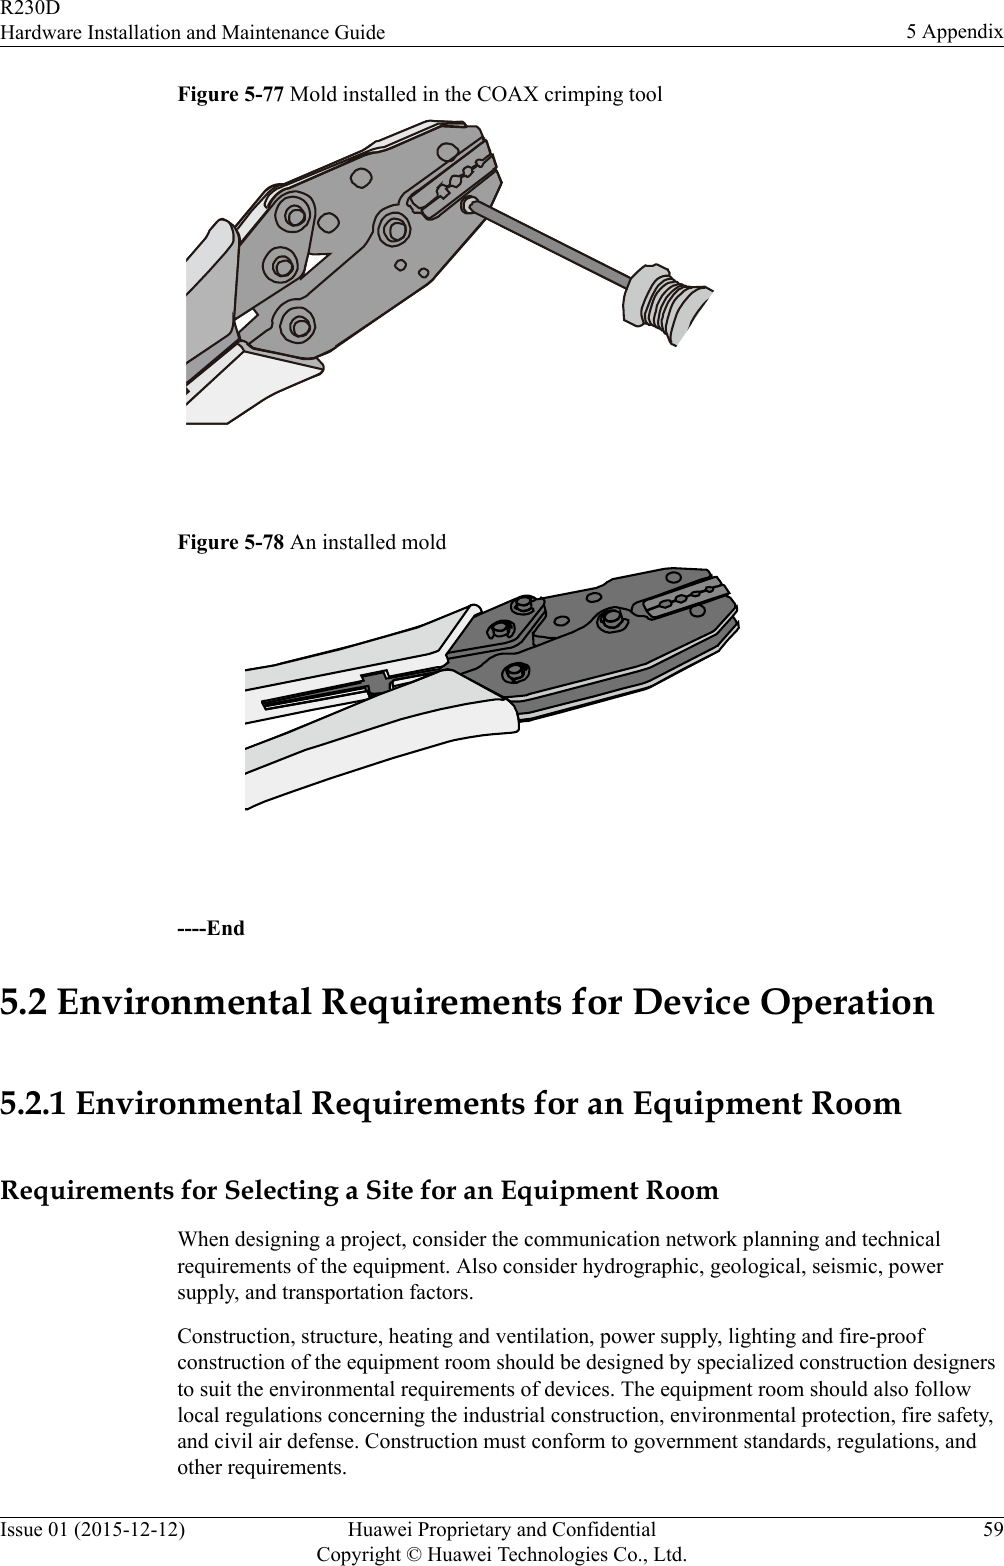 Figure 5-77 Mold installed in the COAX crimping tool Figure 5-78 An installed mold ----End5.2 Environmental Requirements for Device Operation5.2.1 Environmental Requirements for an Equipment RoomRequirements for Selecting a Site for an Equipment RoomWhen designing a project, consider the communication network planning and technicalrequirements of the equipment. Also consider hydrographic, geological, seismic, powersupply, and transportation factors.Construction, structure, heating and ventilation, power supply, lighting and fire-proofconstruction of the equipment room should be designed by specialized construction designersto suit the environmental requirements of devices. The equipment room should also followlocal regulations concerning the industrial construction, environmental protection, fire safety,and civil air defense. Construction must conform to government standards, regulations, andother requirements.R230DHardware Installation and Maintenance Guide 5 AppendixIssue 01 (2015-12-12) Huawei Proprietary and ConfidentialCopyright © Huawei Technologies Co., Ltd.59